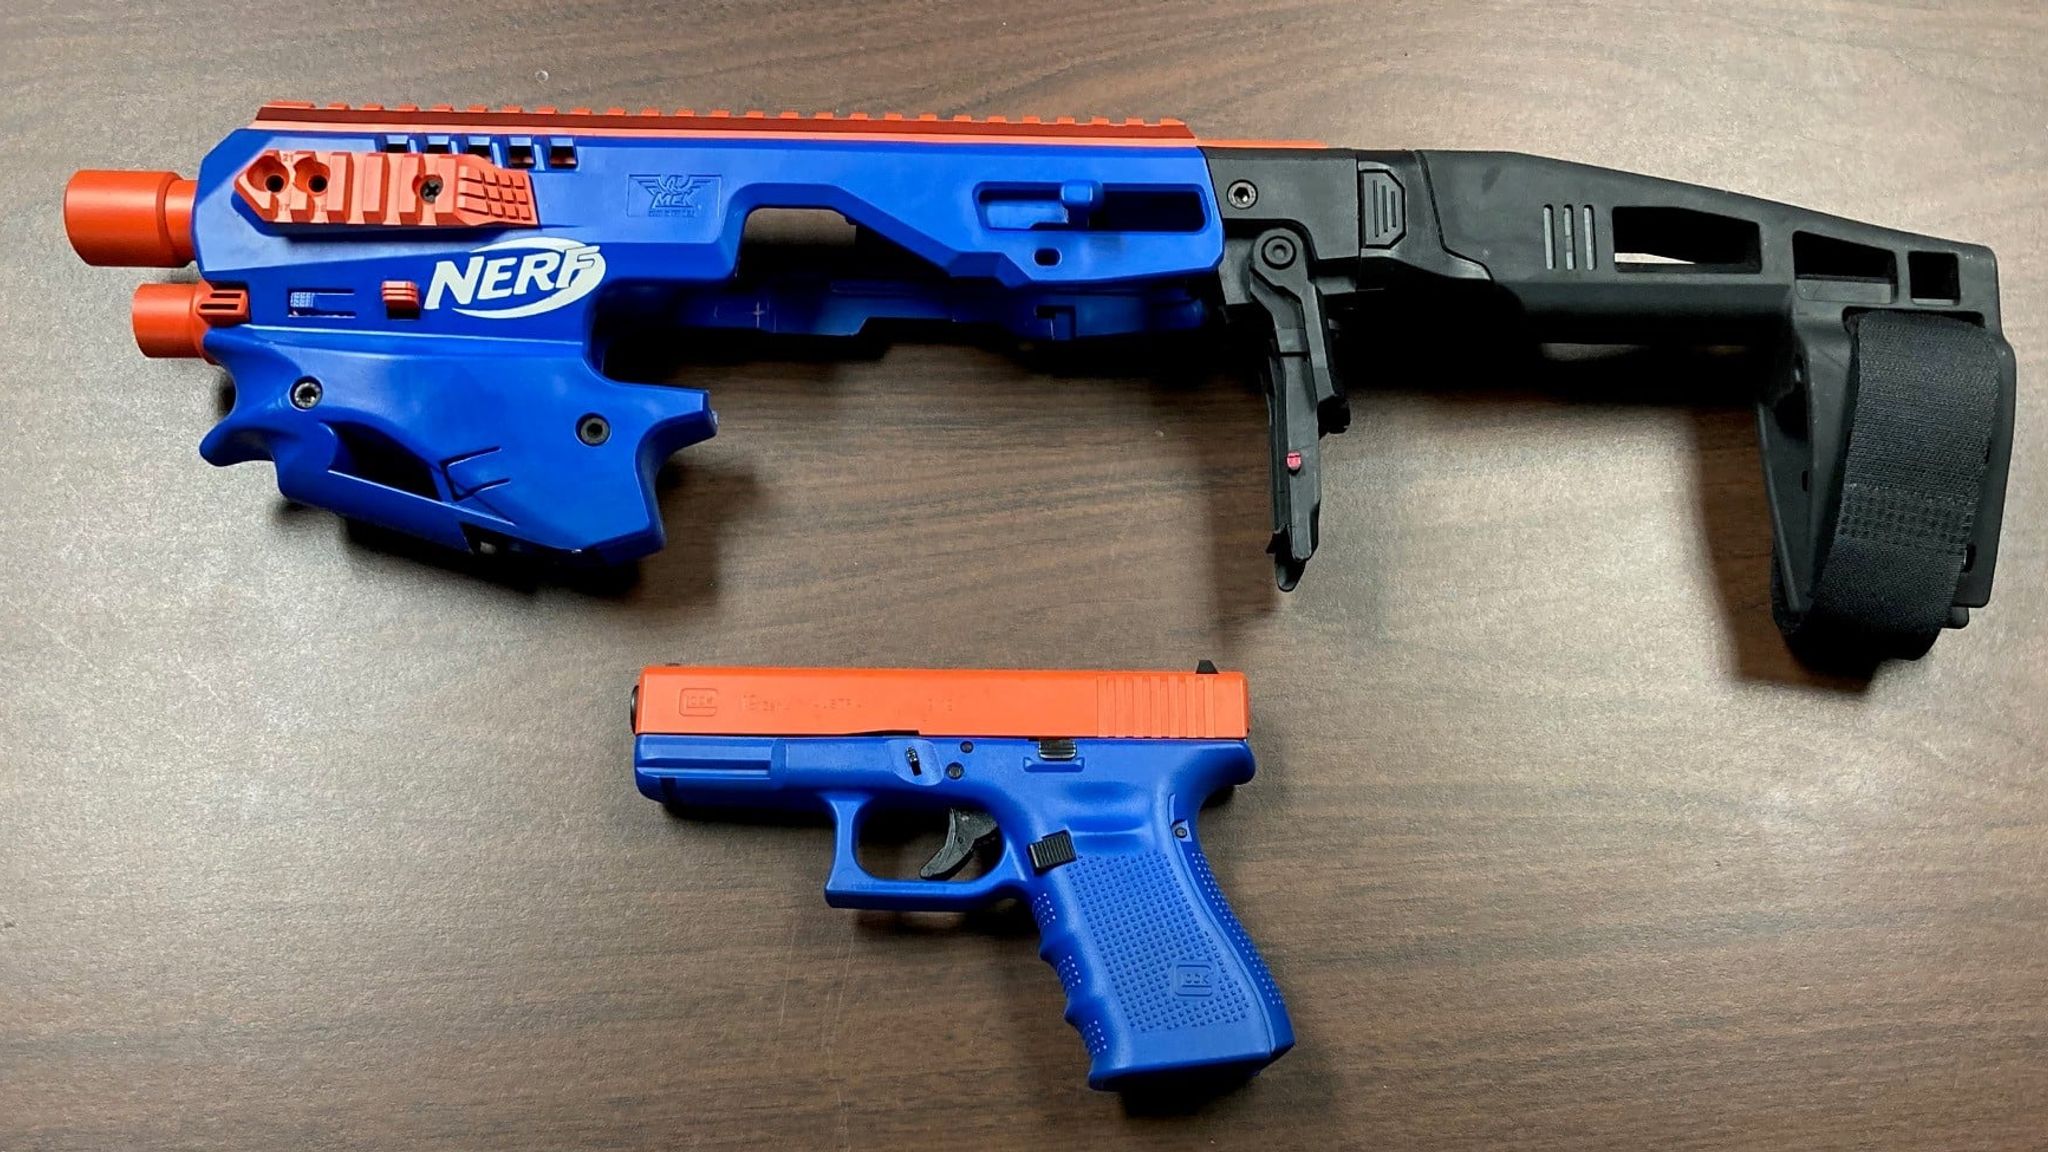 Police seize real gun disguised as Nerf toy during drug raid - Patabook